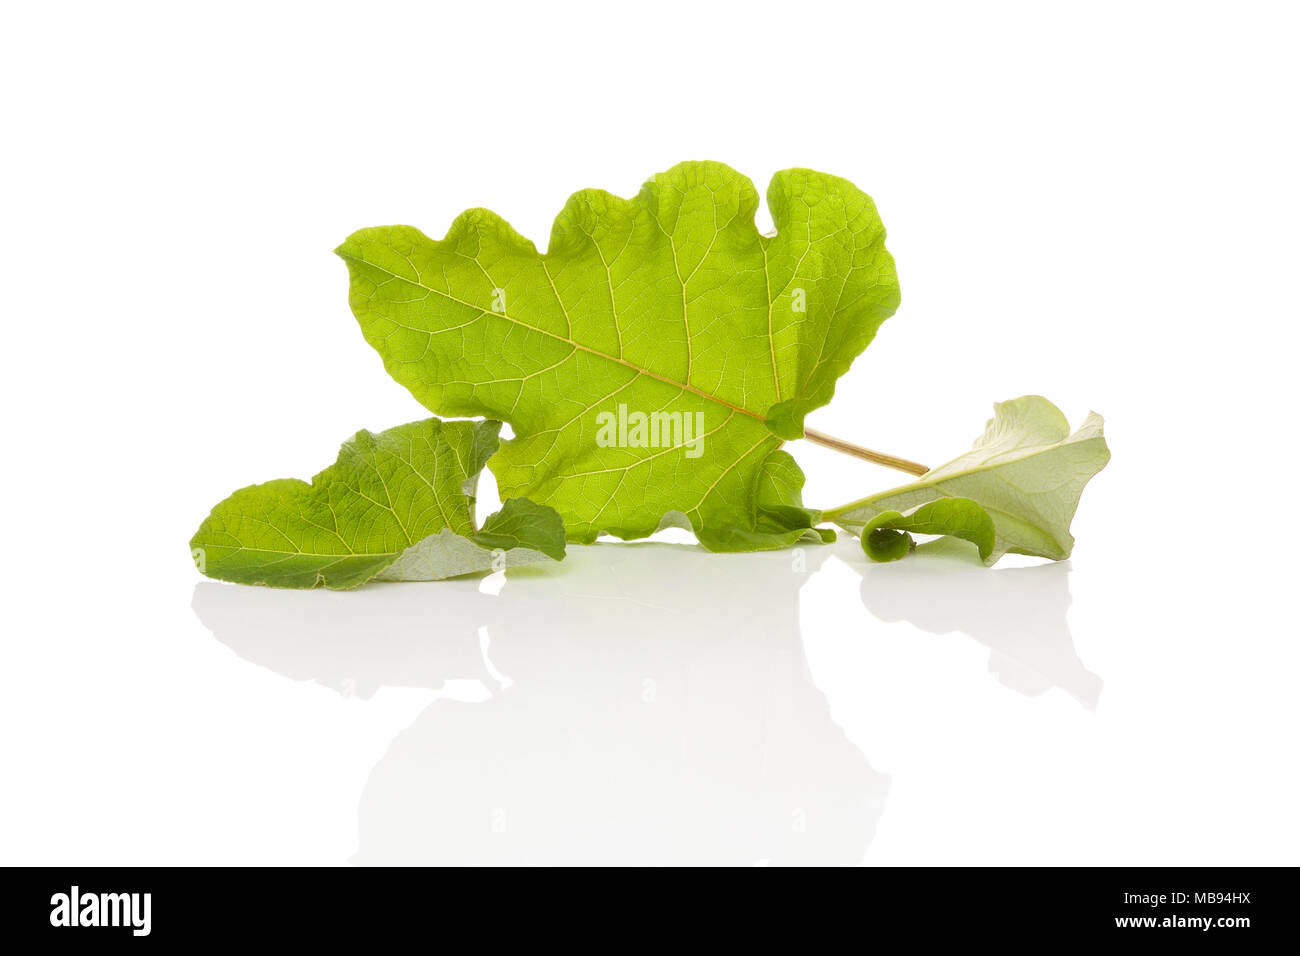 Healthy Greater Burdock leaves isolated on white background. Alternative herbal medicine. Stock Photo